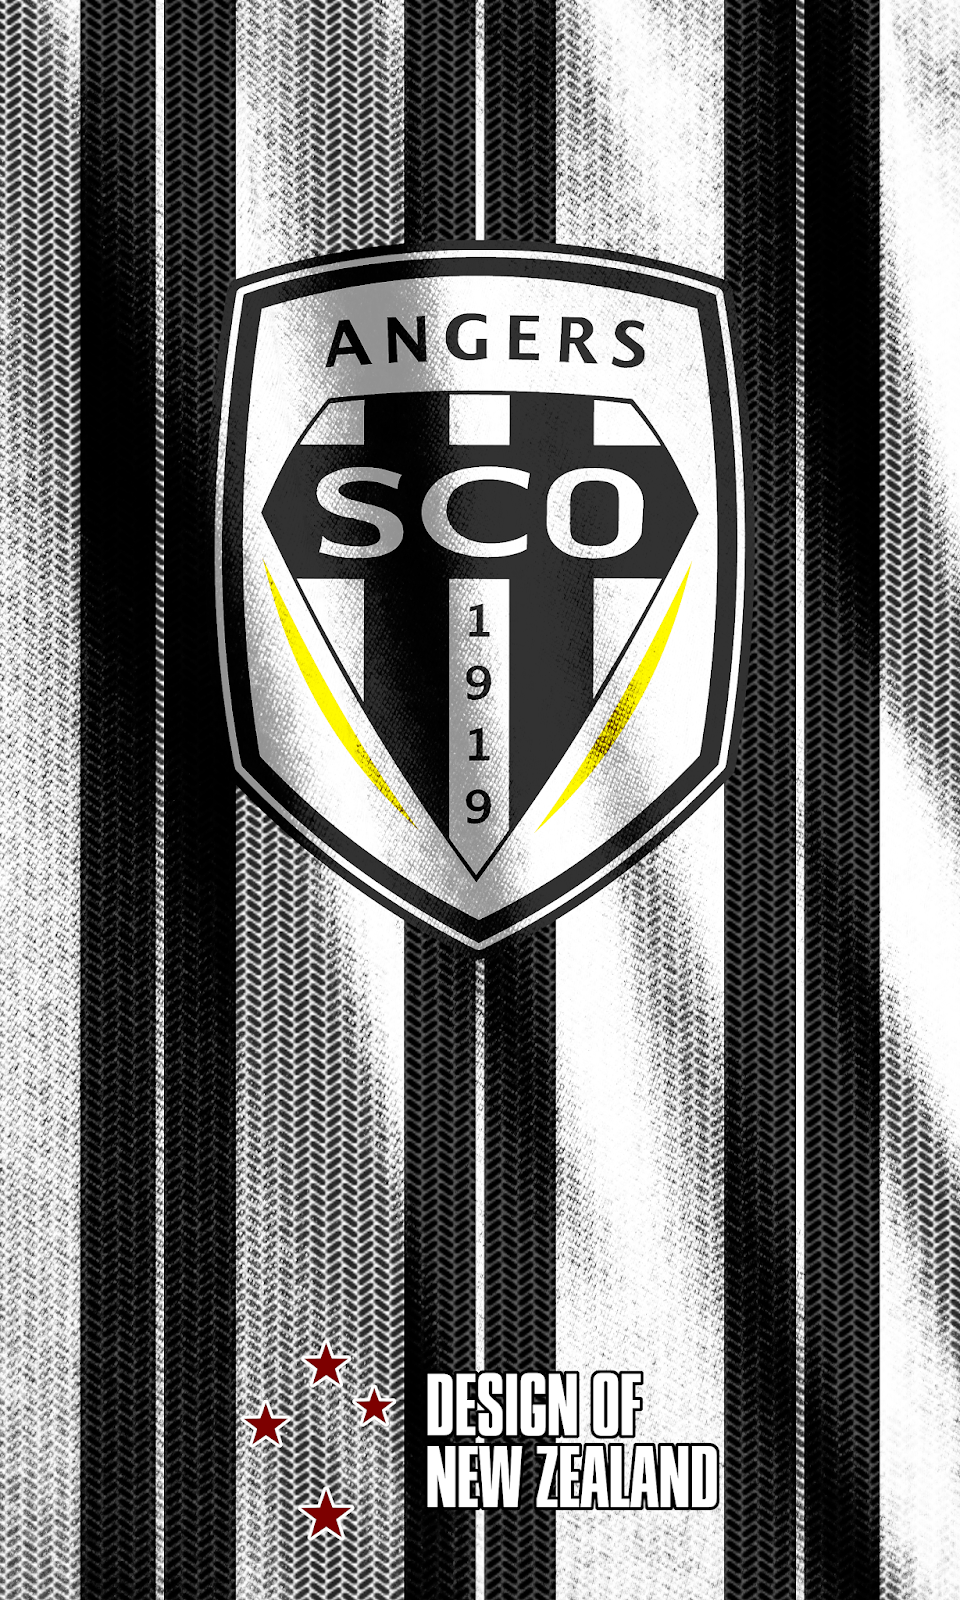 Wallpaper Angers SCO. The Football Illustrated, Inc